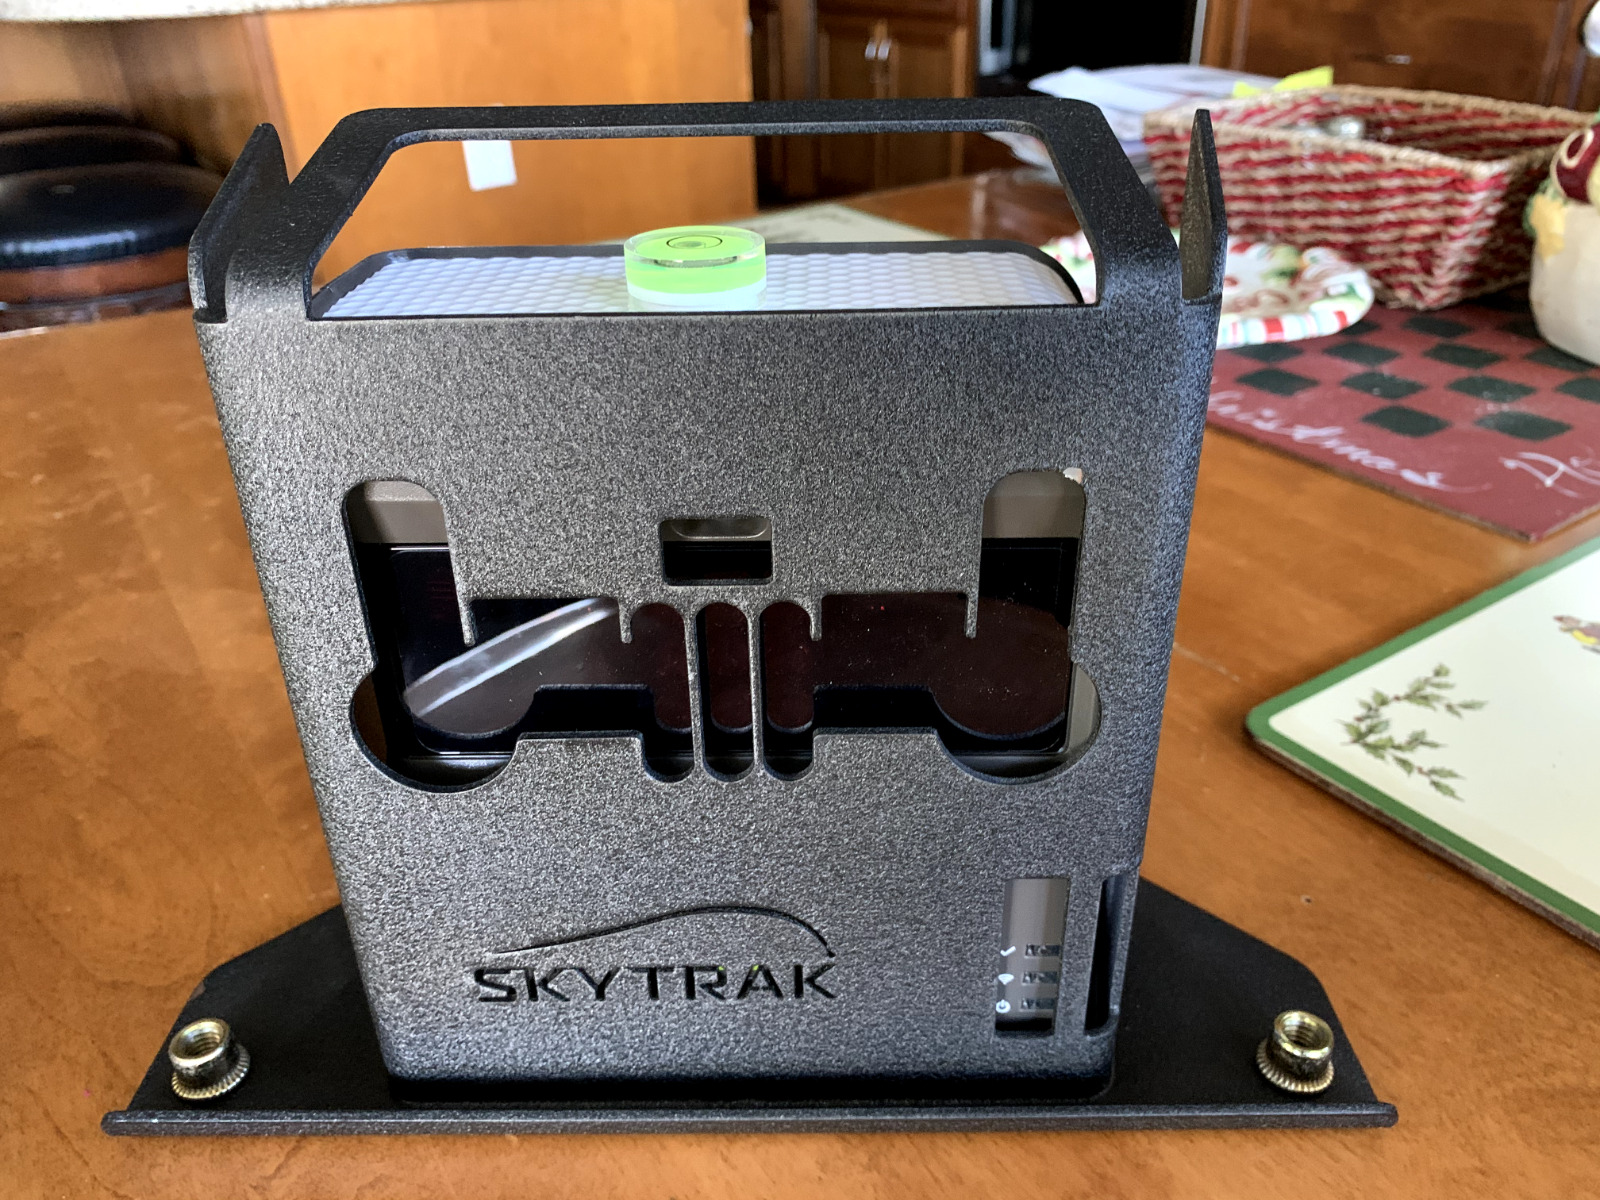 Skytrak Launch Monitor / Golf Simulator With Official Fmj Protective Metal Case